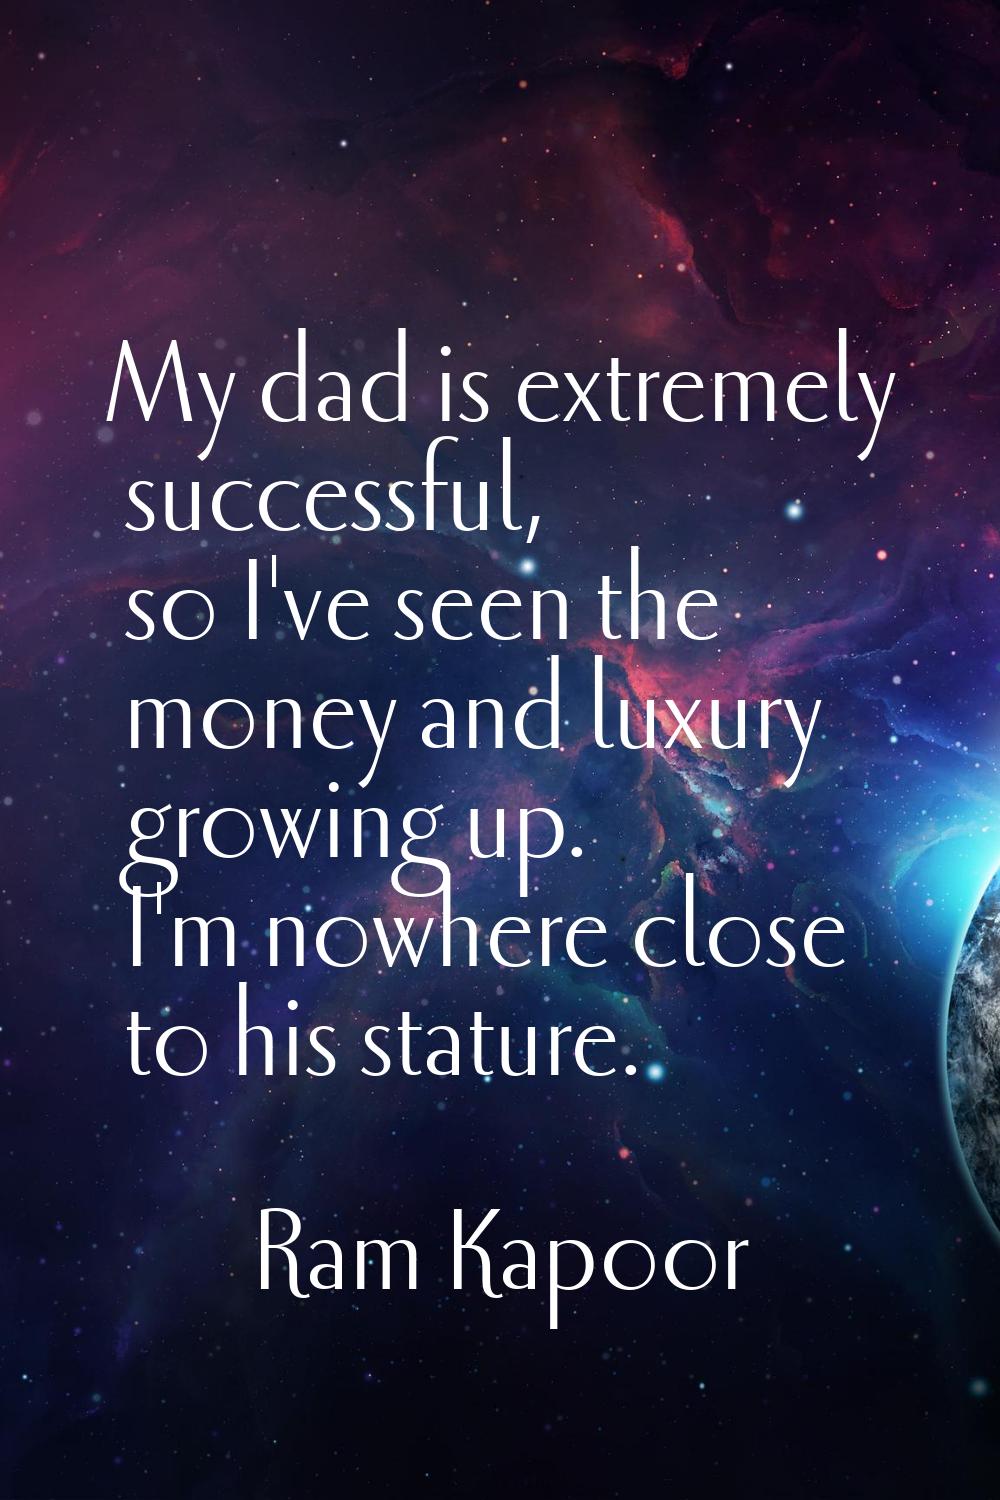 My dad is extremely successful, so I've seen the money and luxury growing up. I'm nowhere close to 